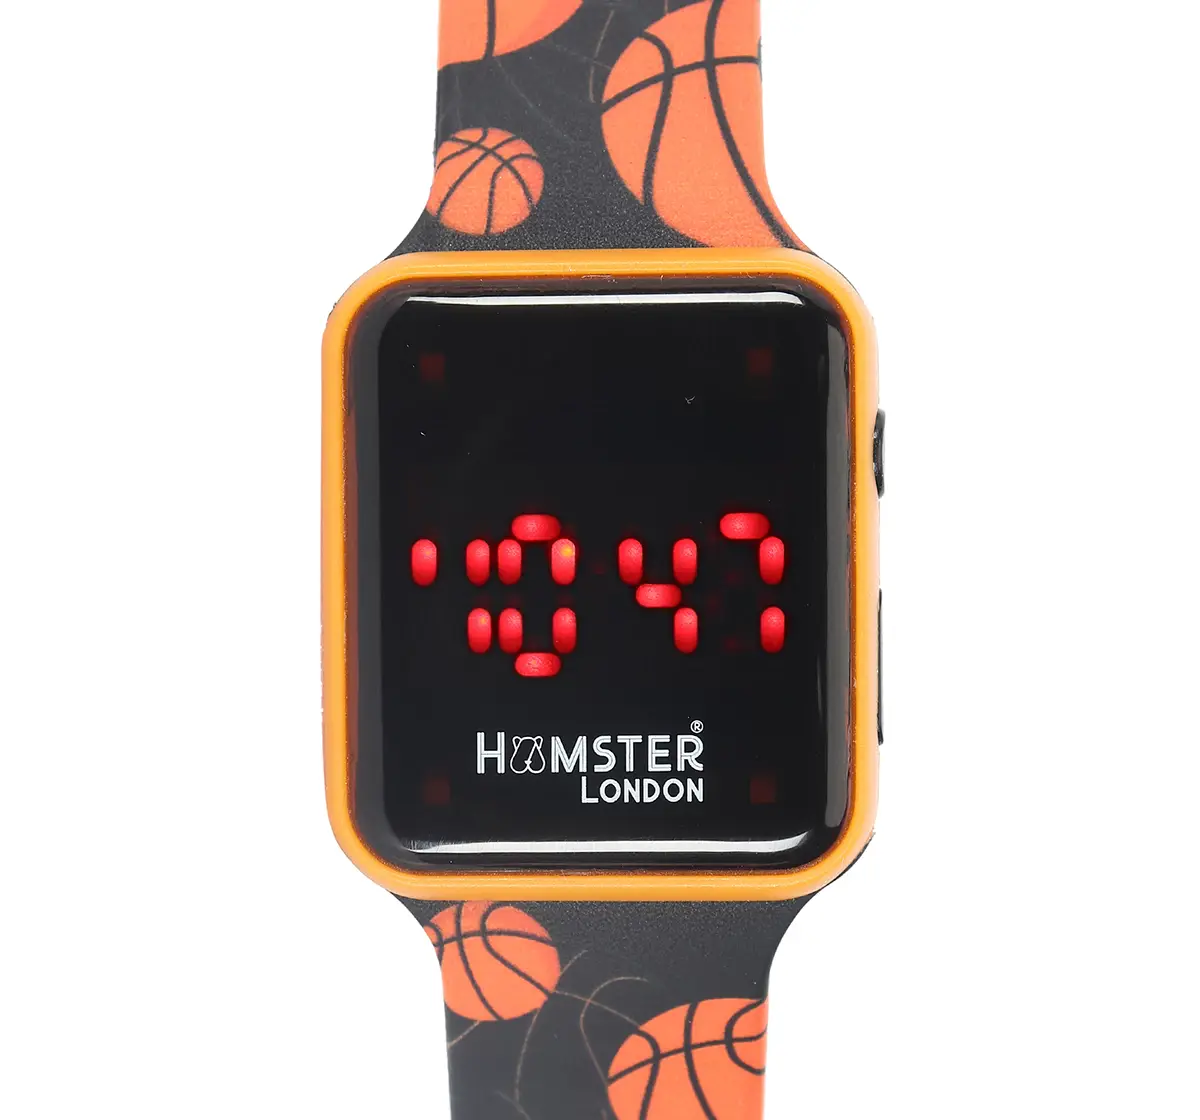 Hamster London Mirror Face Slicone Band Digital Watch Basketball Yellow, 5Y+